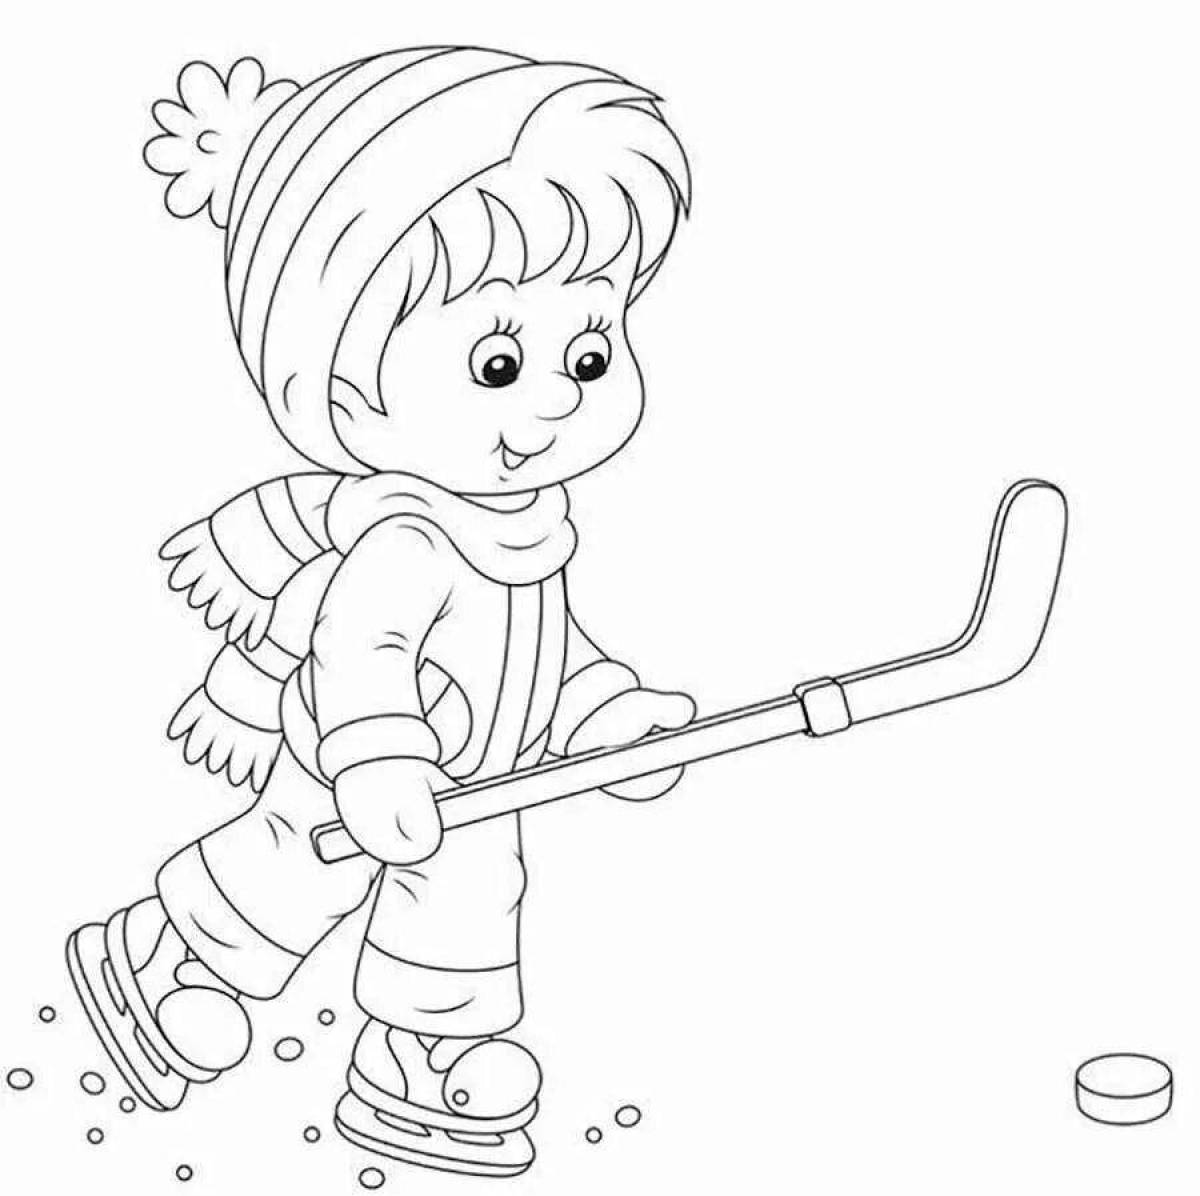 Sweet winter fun coloring book for 4-5 year olds